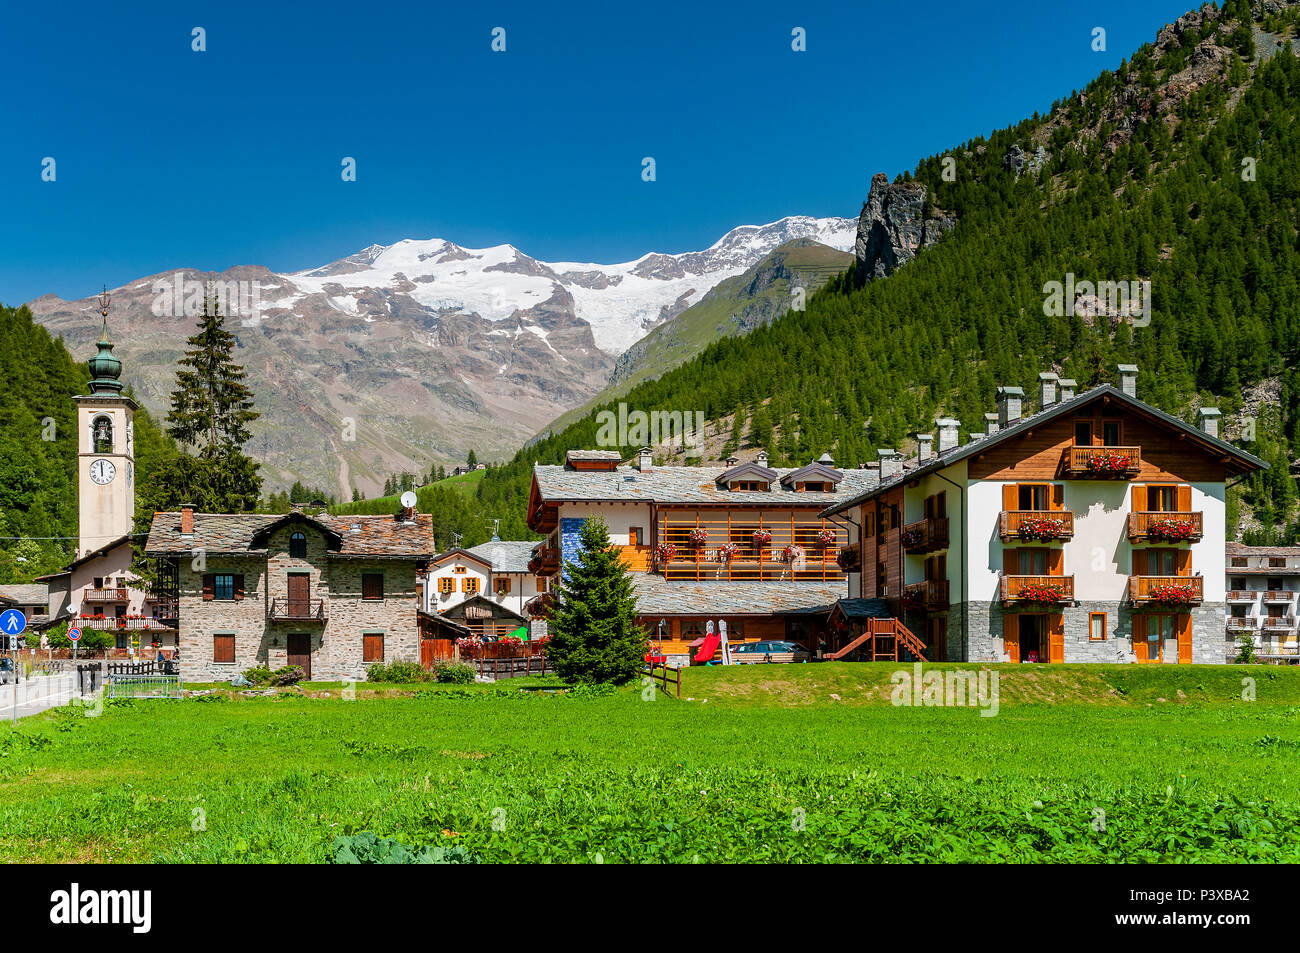 Summer view of Gressoney La Trinite, Aosta Valley, Italy with Monte Rosa in the background Stock Photo